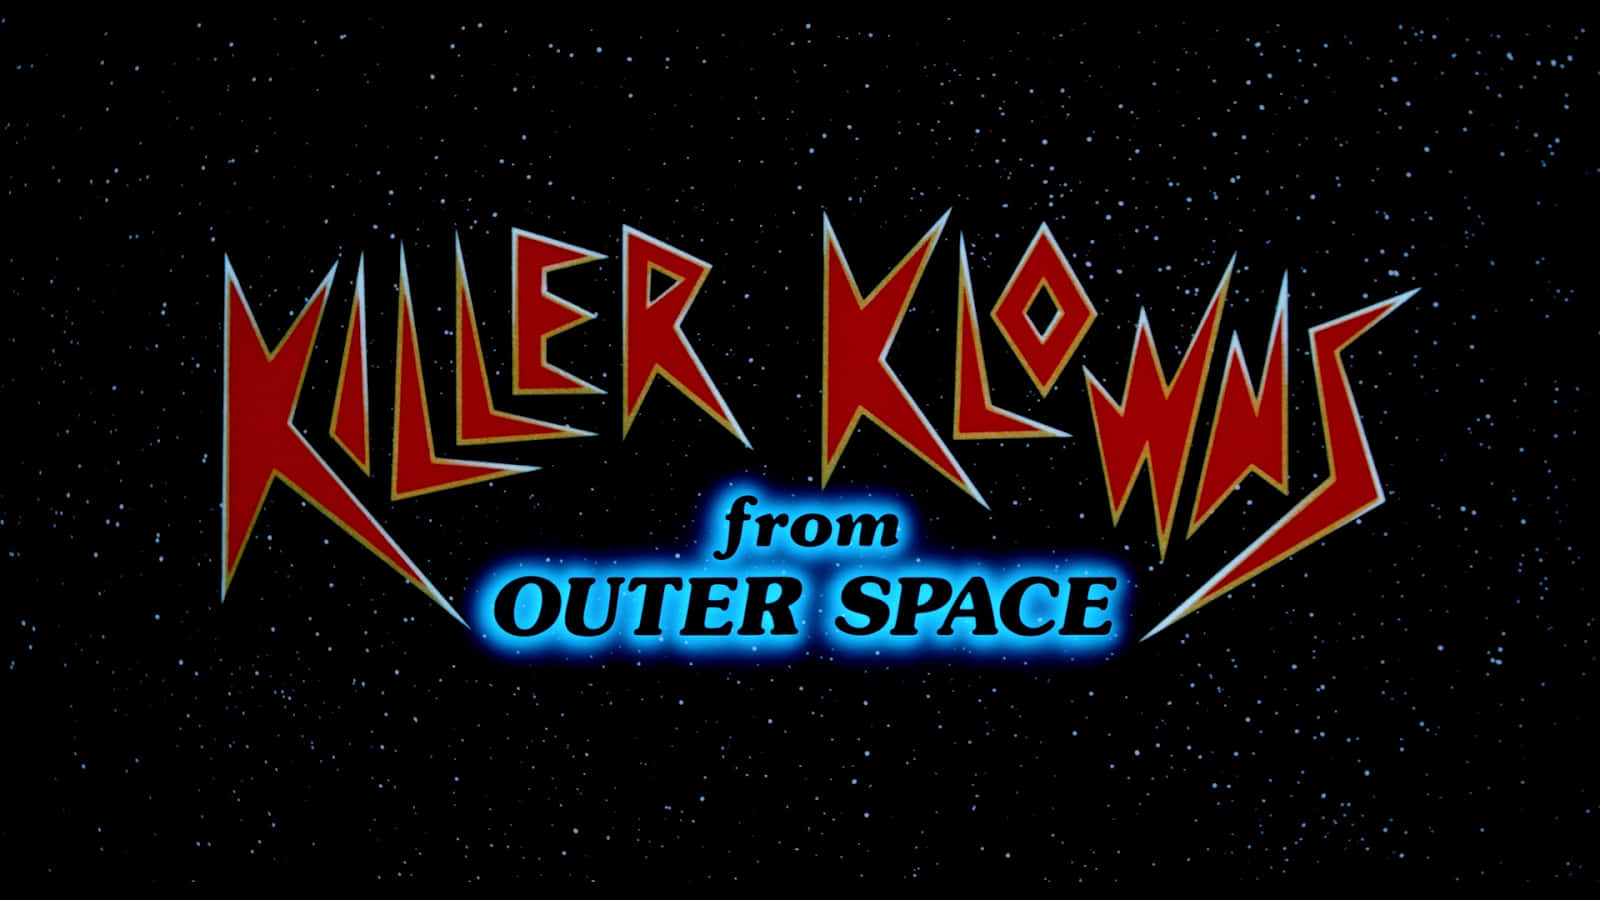 Killer Kwons From Outer Space Wallpaper